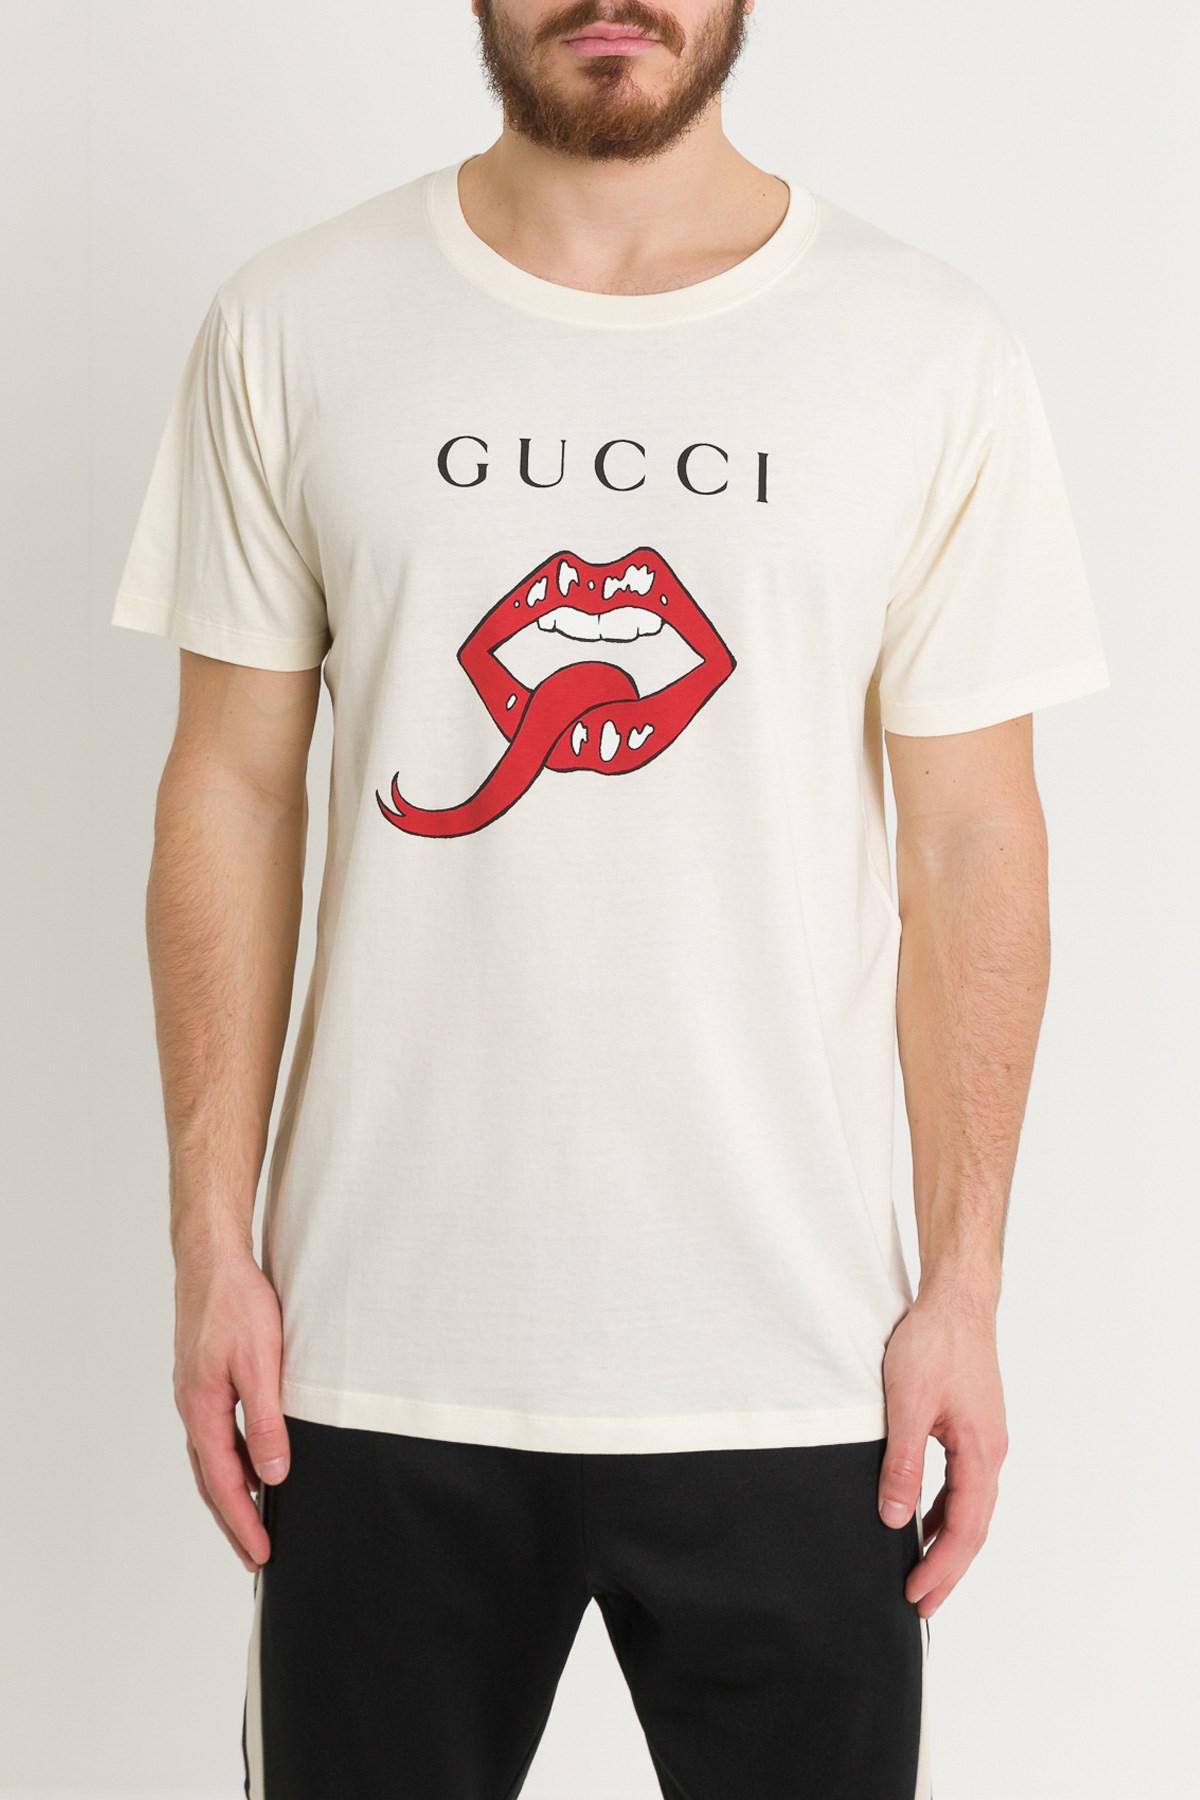 Gucci Cotton Oversized T-shirt With Mouth for Men - Lyst